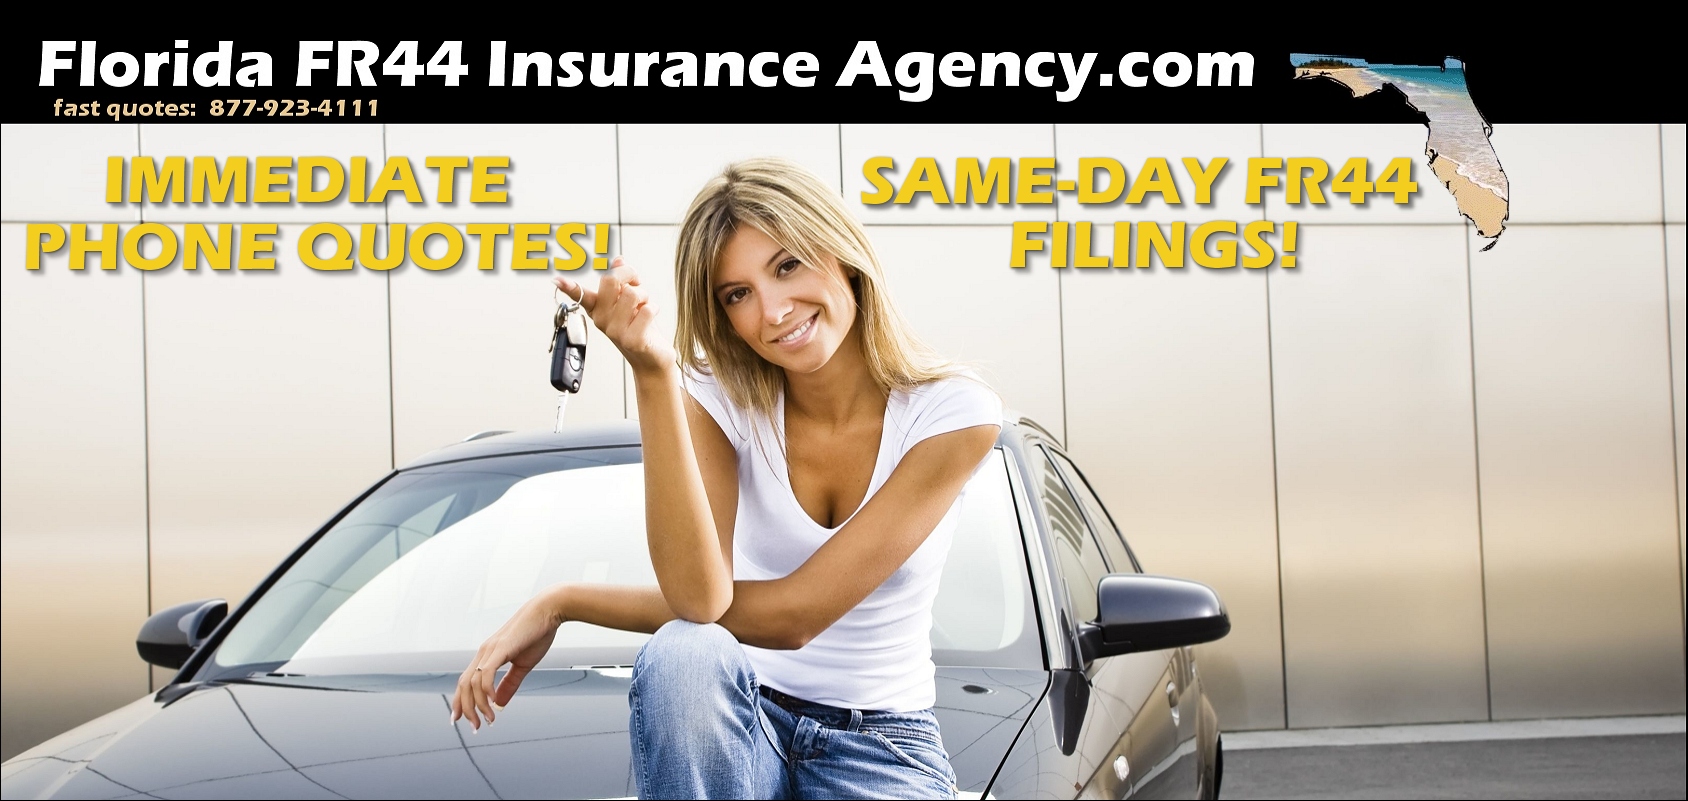 low cost Florida FR44 insurance quotes logo